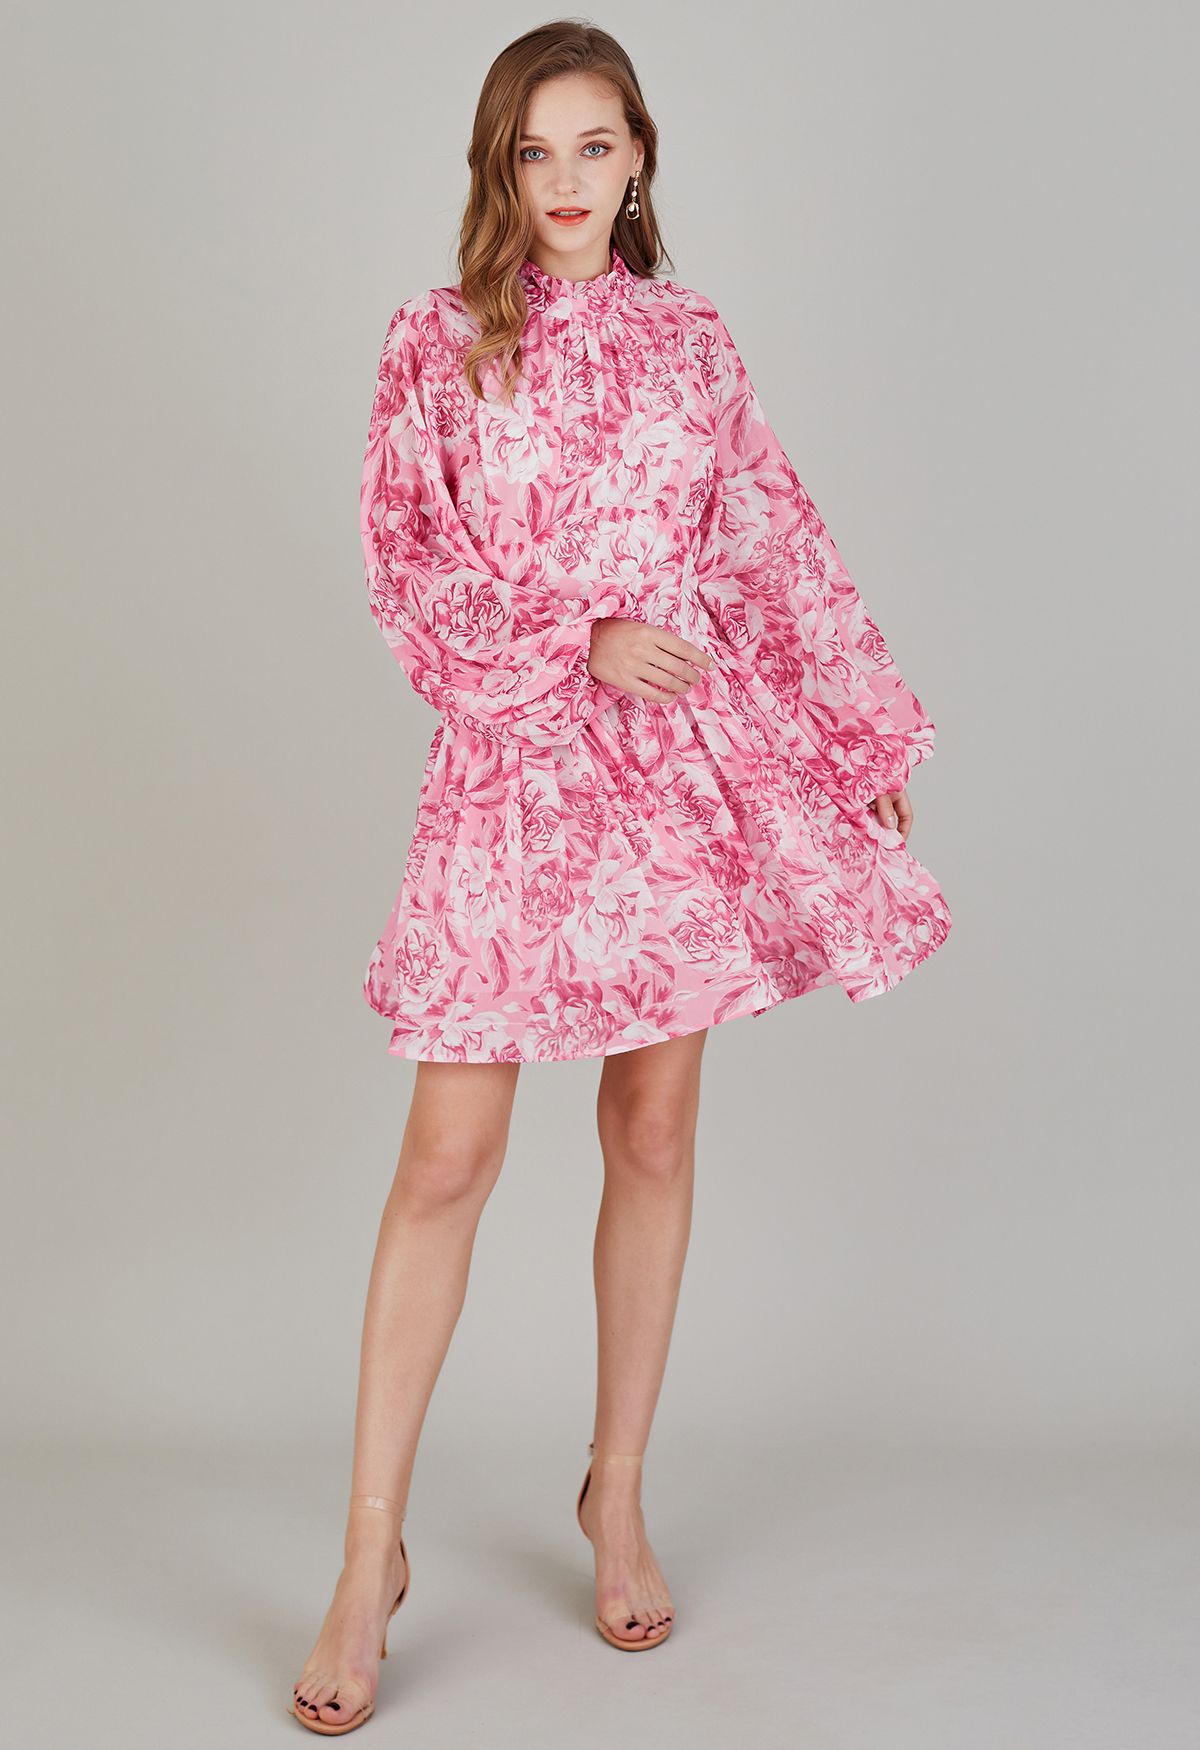 Cutout Back Floral Bubble Sleeve Frilling Dress in Pink